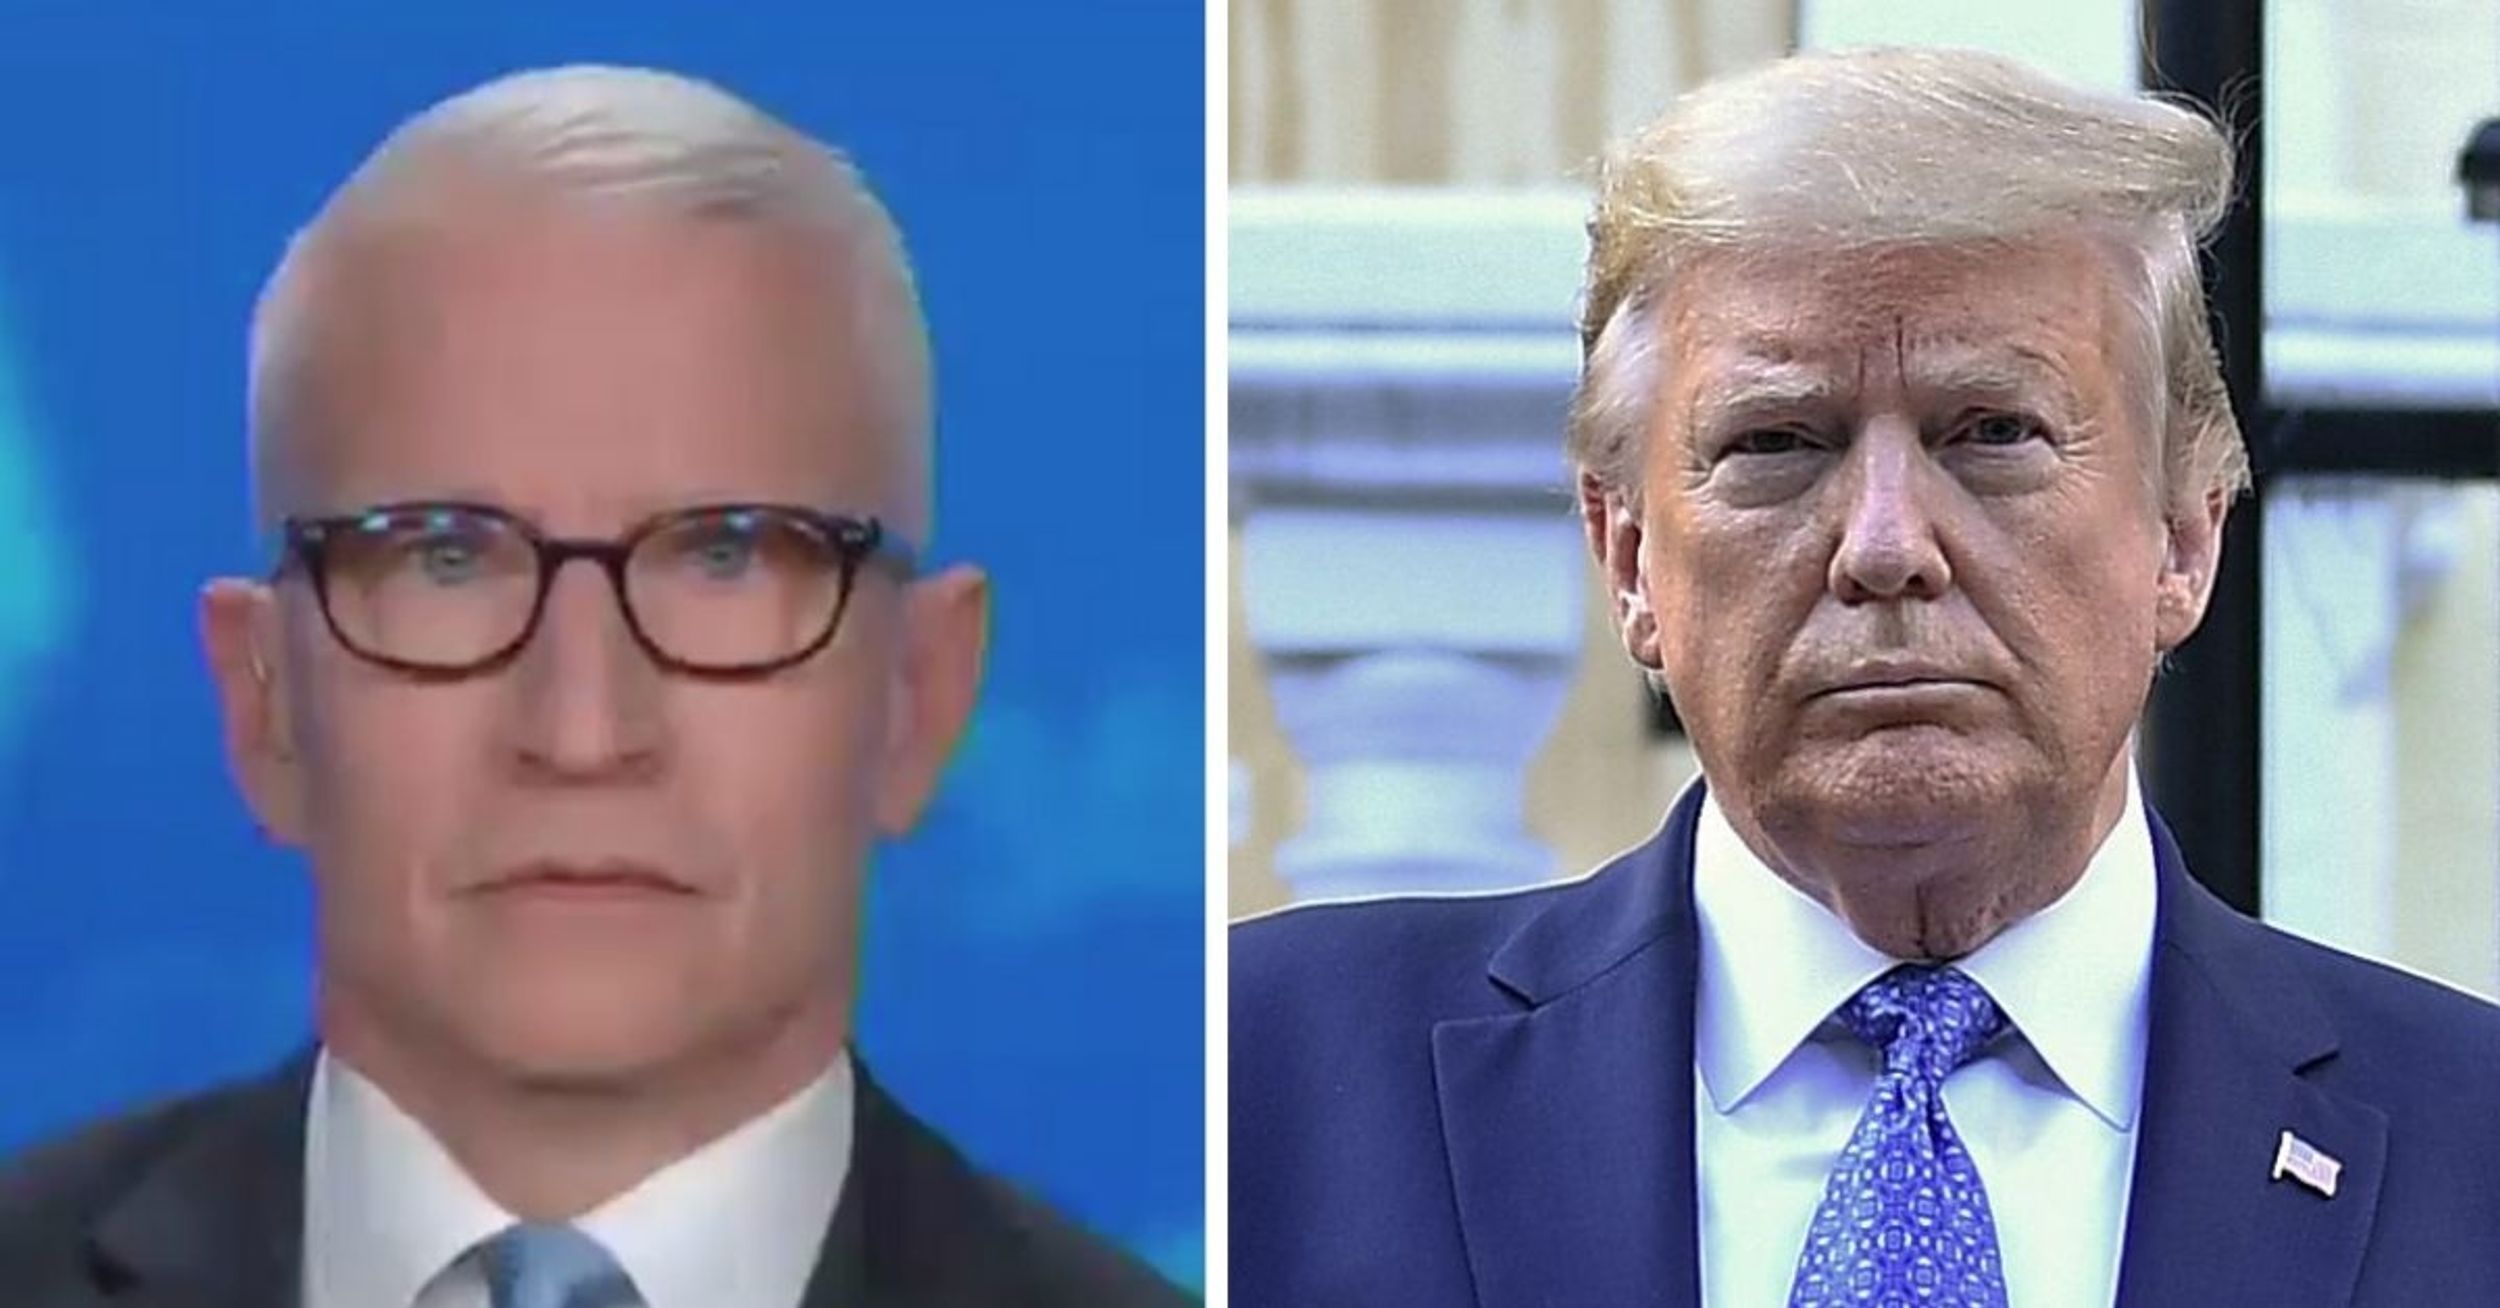 When Anderson Cooper Heard the Real Reason Trump Held That Photo-Op at St. John's Church, His Reaction Was So Pure